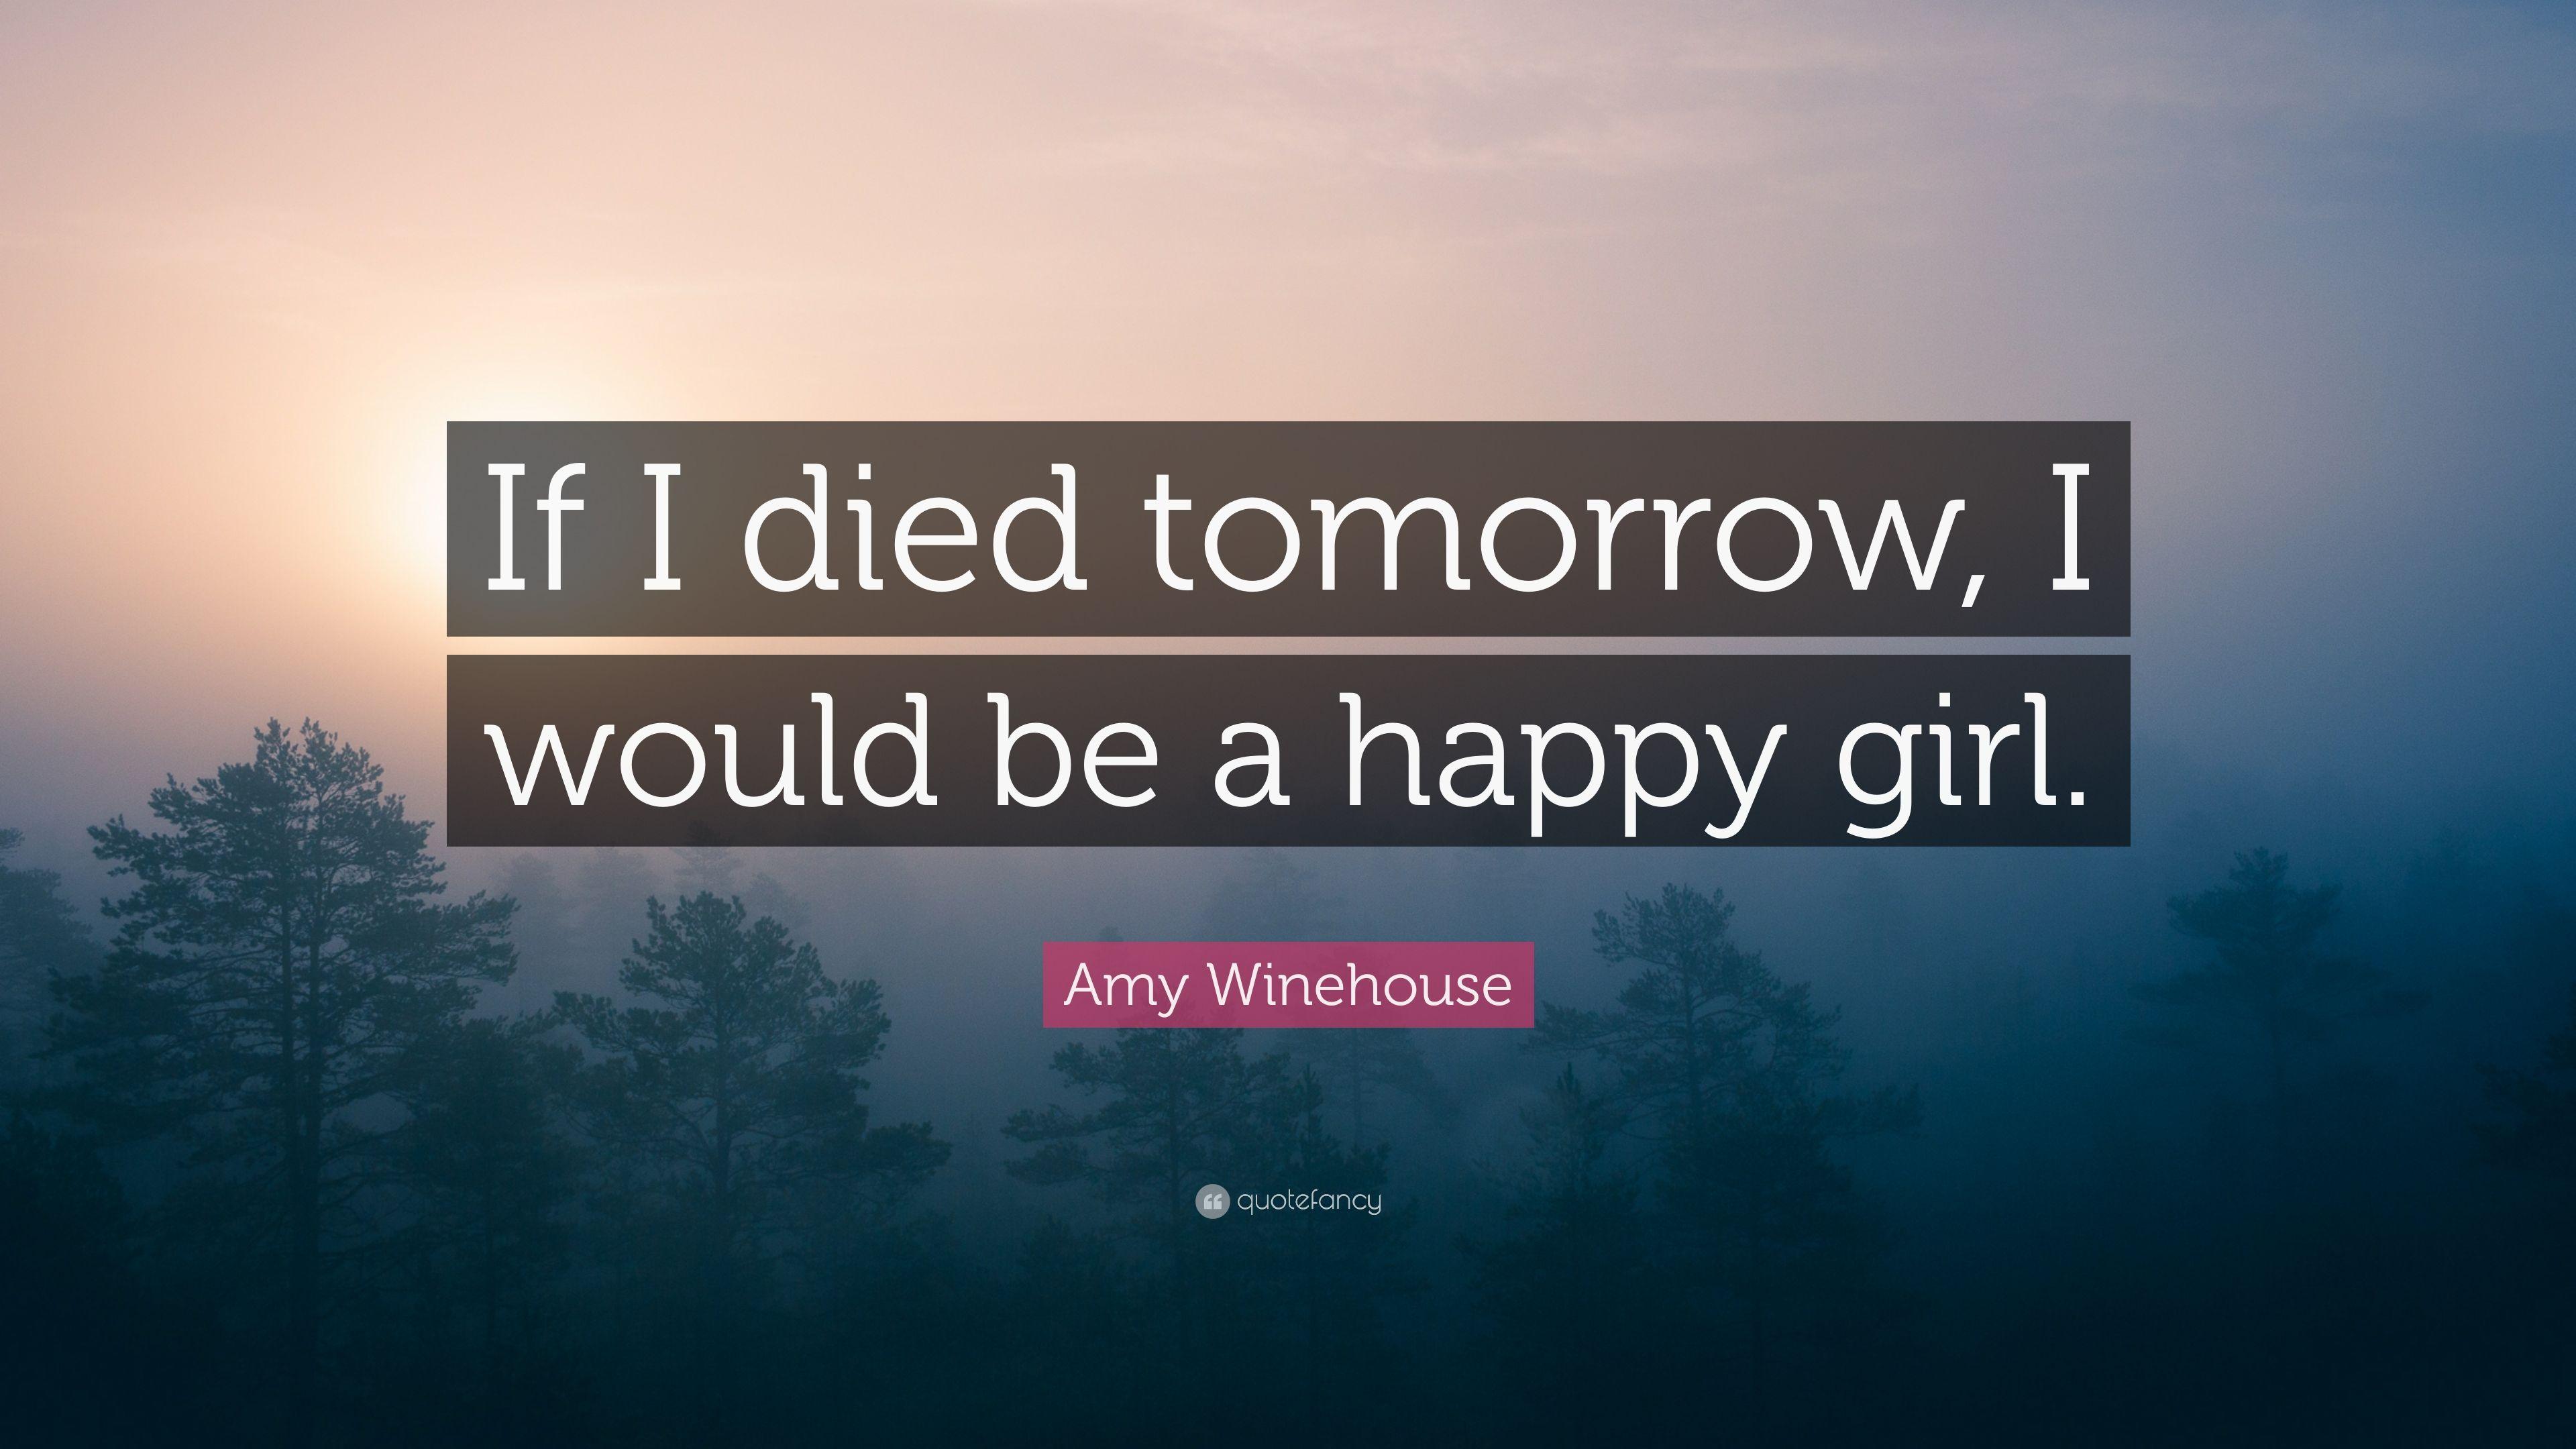 Amy Winehouse Quote: “If I died tomorrow, I would be a happy girl.” (7 wallpaper)